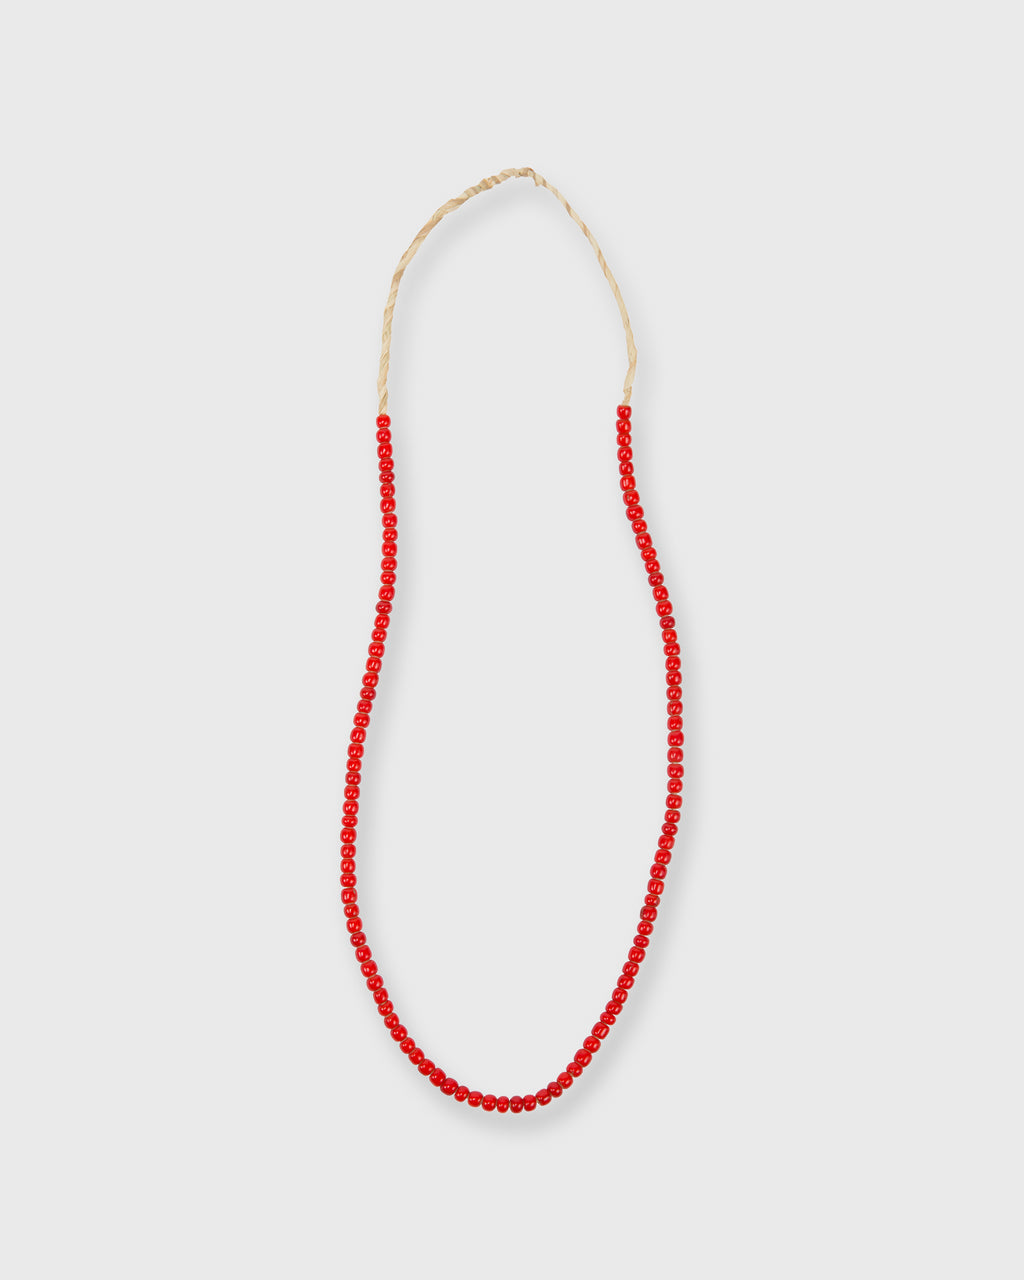 Small African Beads Red